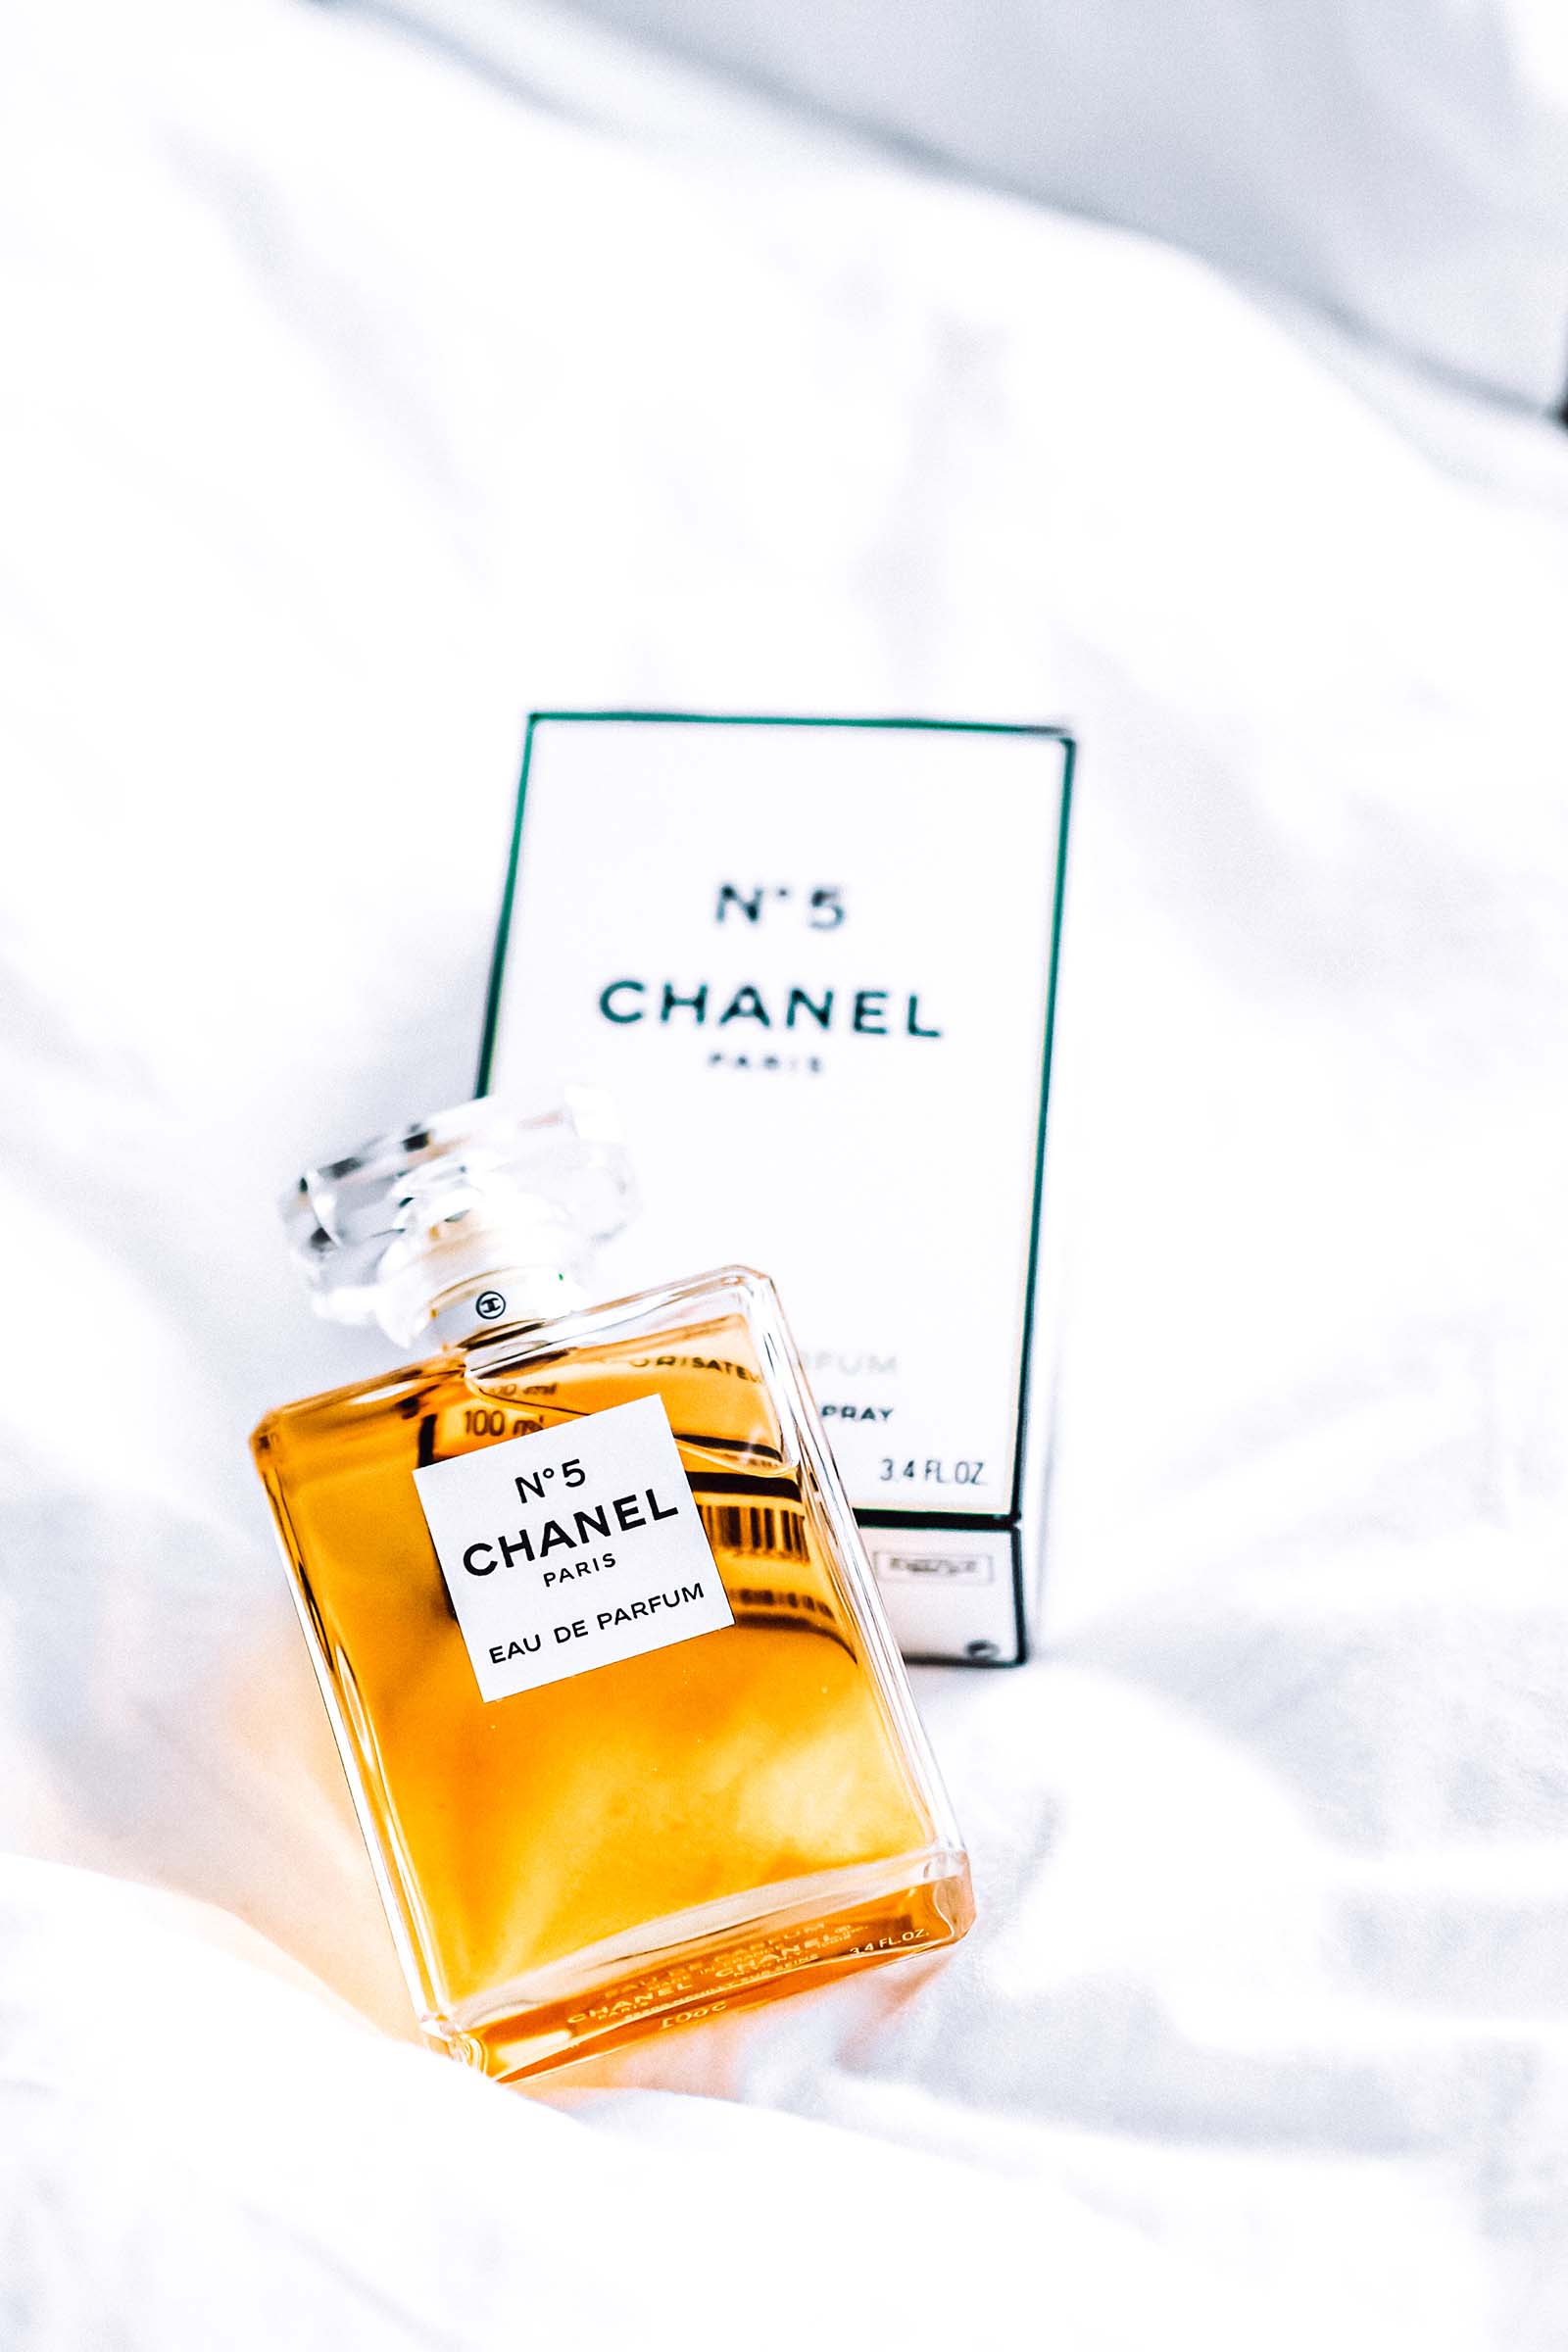 12 startling secrets you still don't know about Chanel No. 5 (even